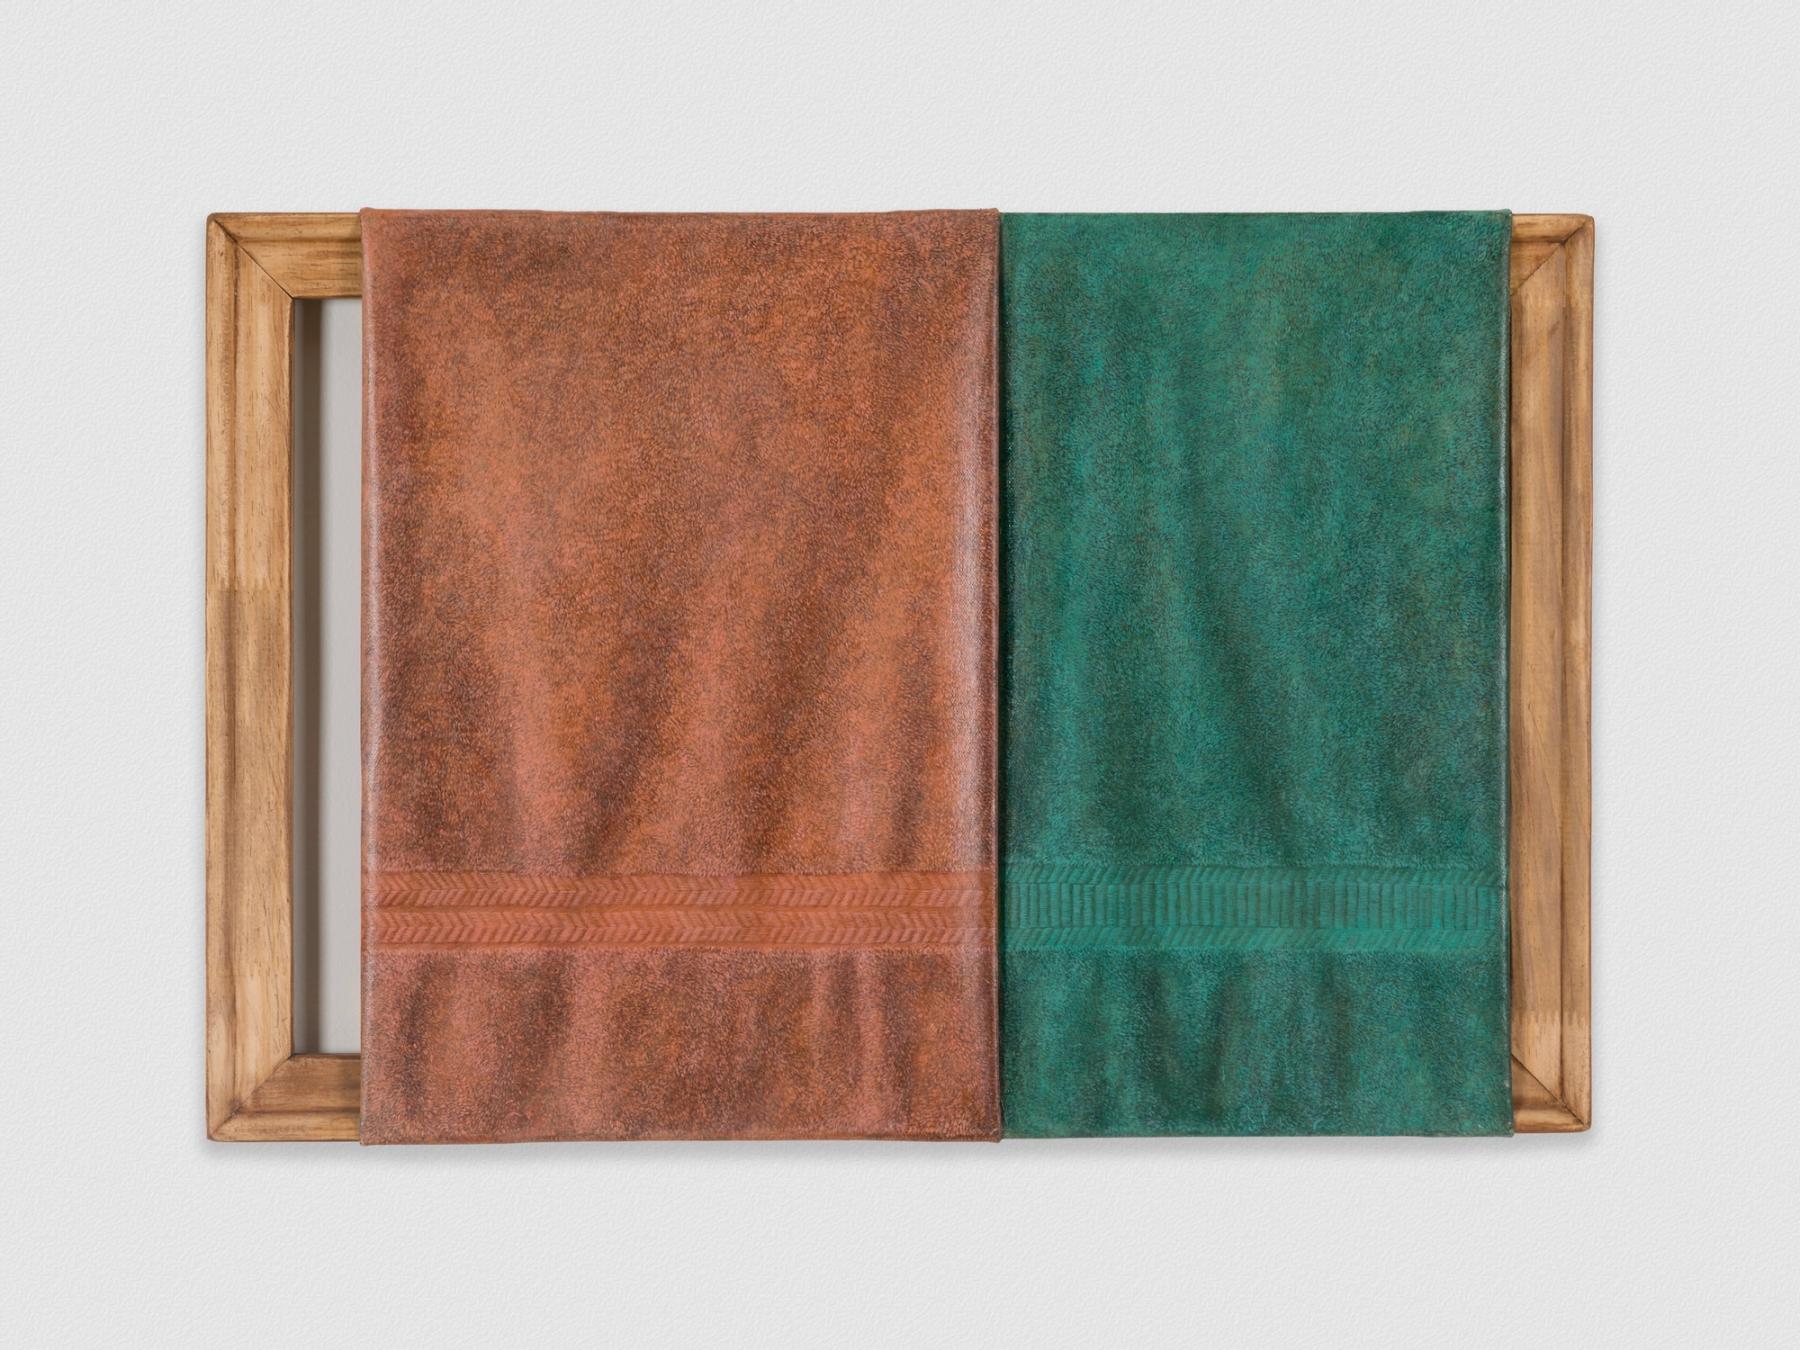 Painting of two towels, one orange and one teal, wrapped over a wooden frame.